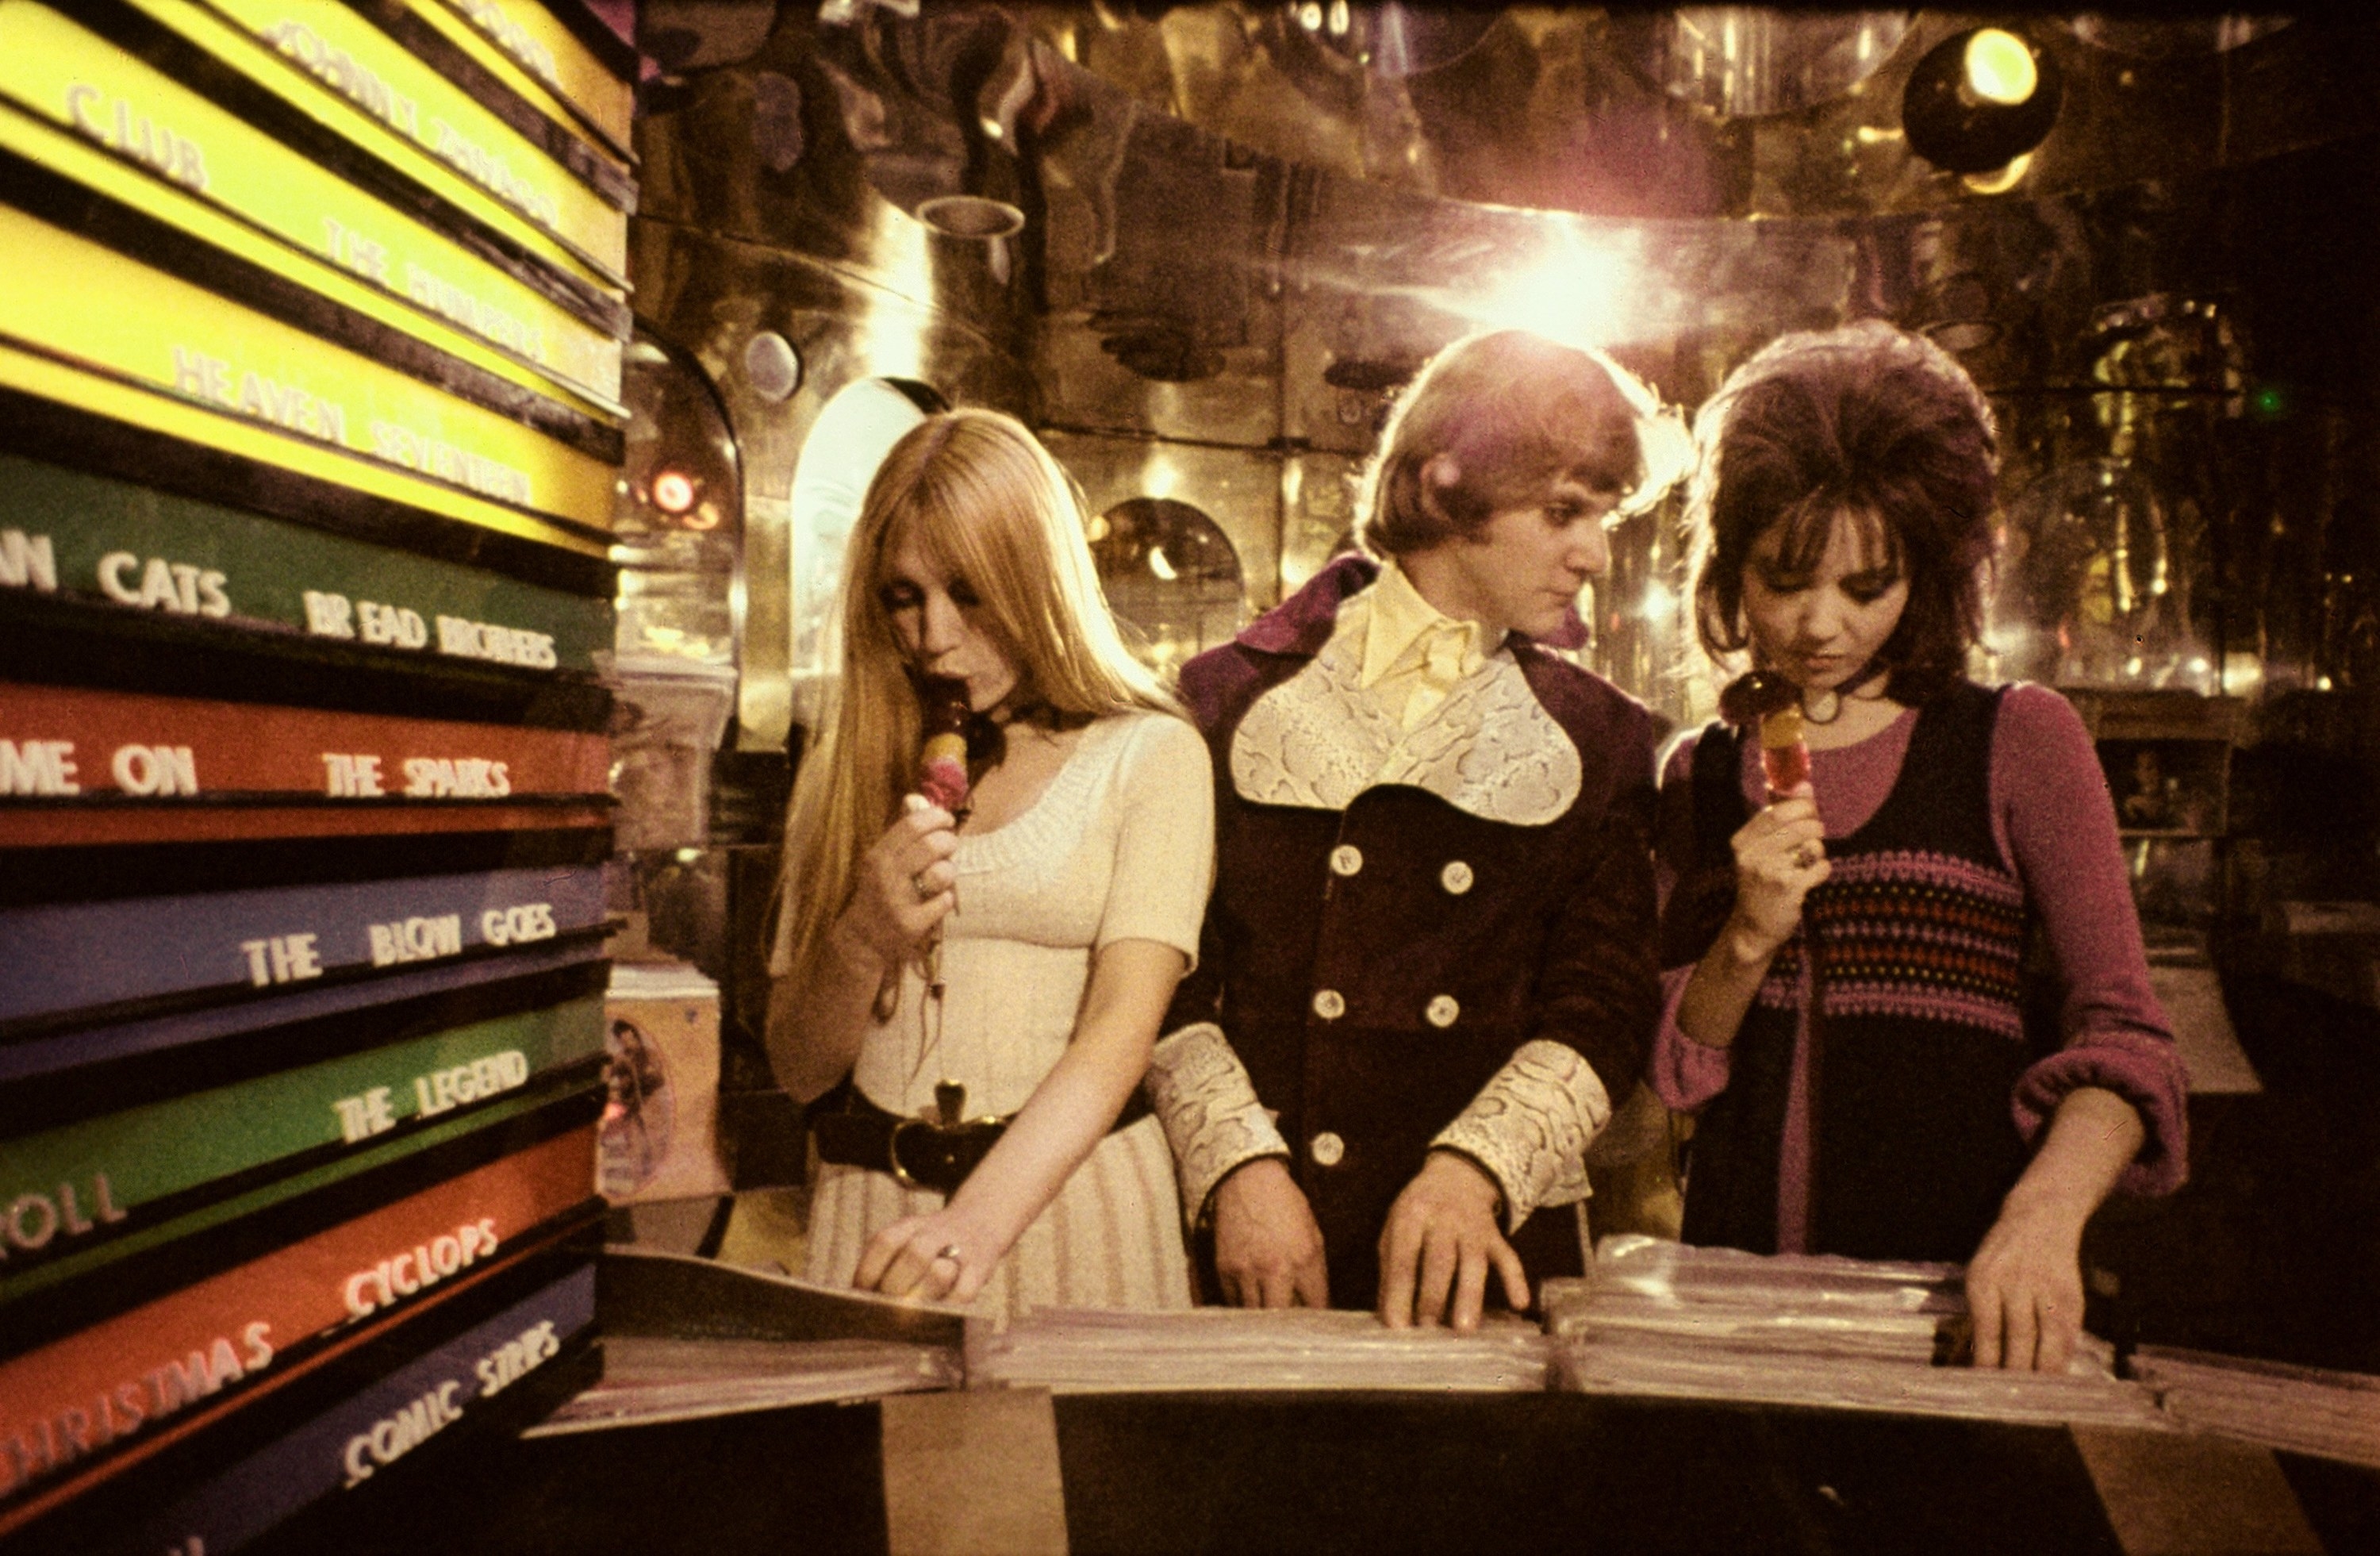 A still of actor Malcolm McDowell standing next to two women in A Clockwork Orange